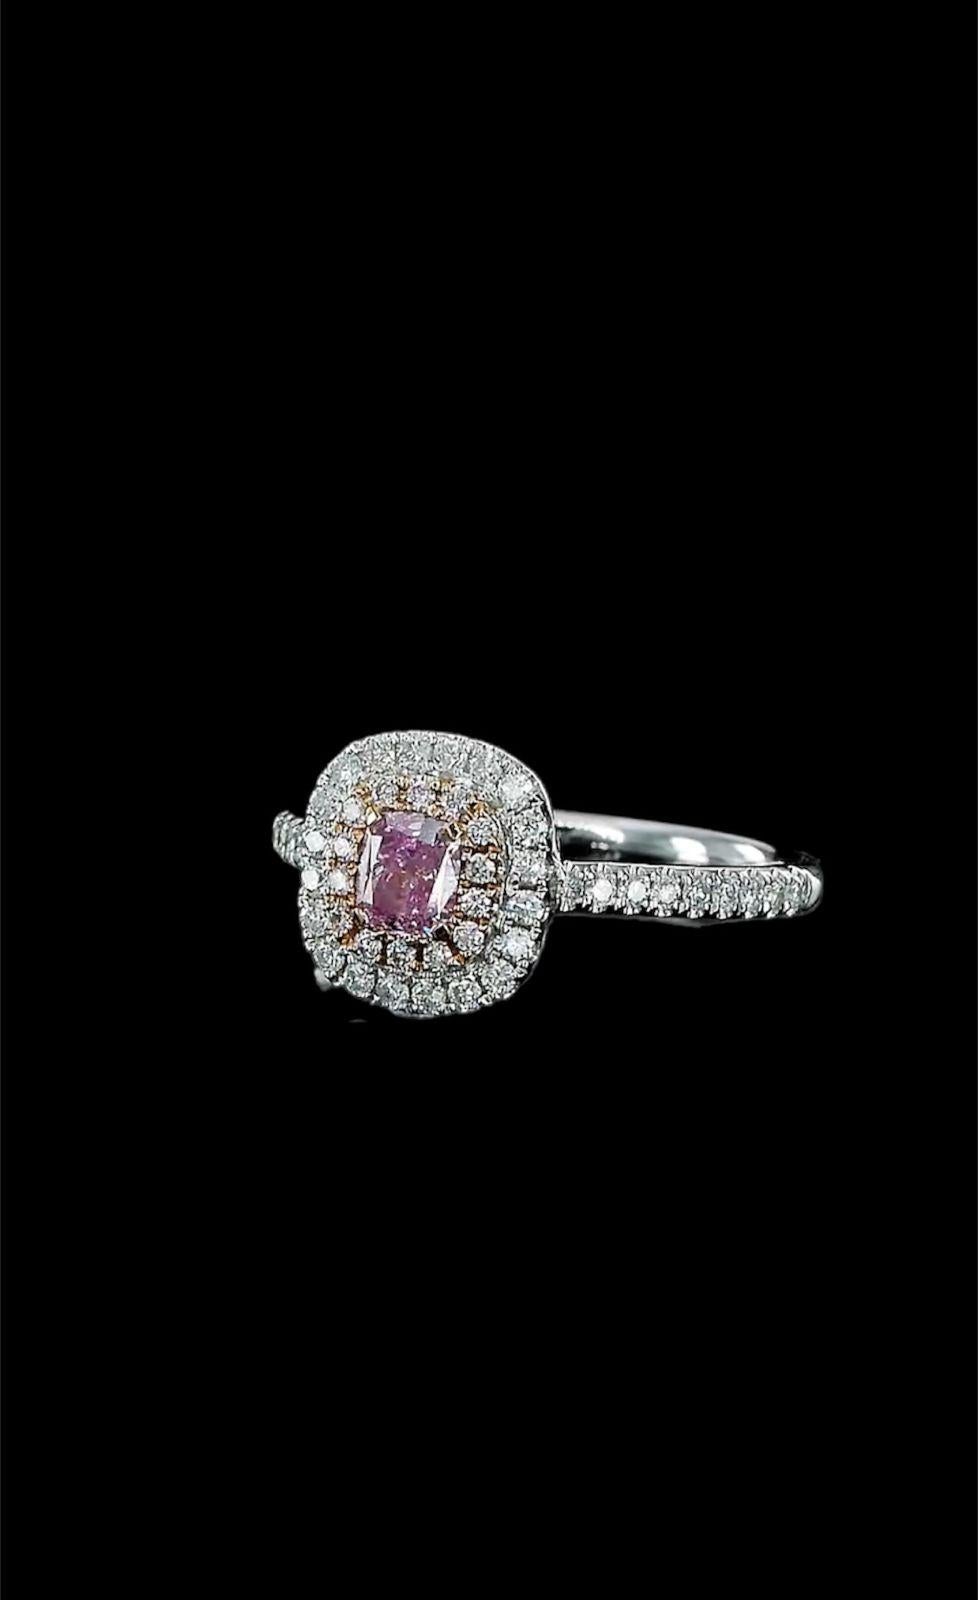 Women's or Men's GIA Certified 0.33 Carat Faint Pink Diamond Ring SI2 Clarity For Sale